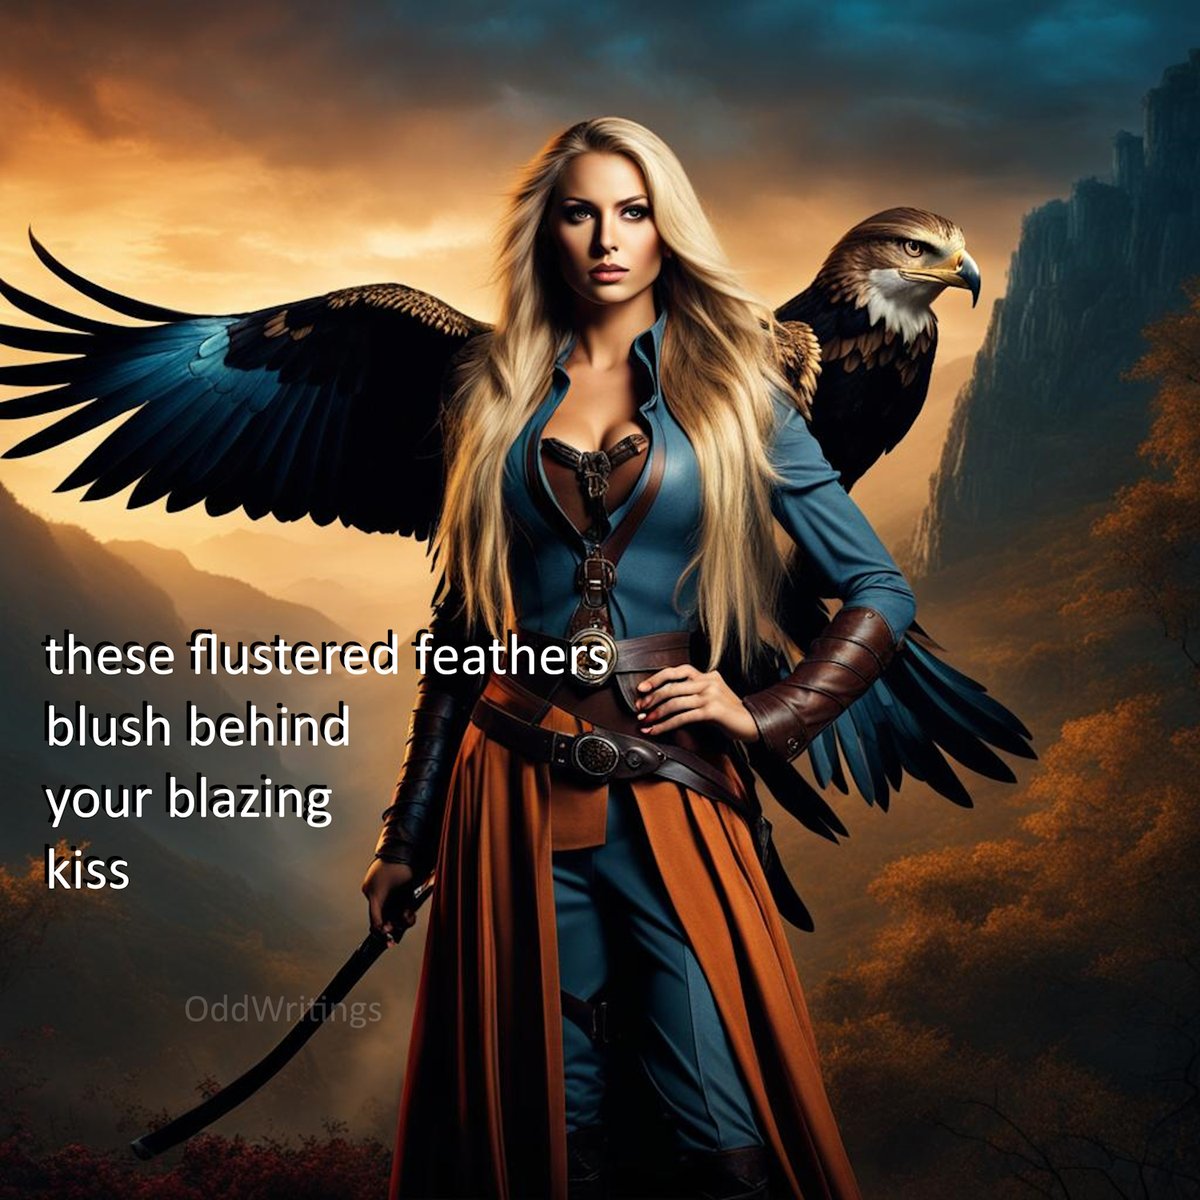 these flustered feathers
blush behind
your blazing
kiss

#Only8Words #KinkPrompt #WritingCommunity

This #poem and image will appear in my book 'Digital Friends 1' : 
amazon.com/dp/B0CW1FSVBC